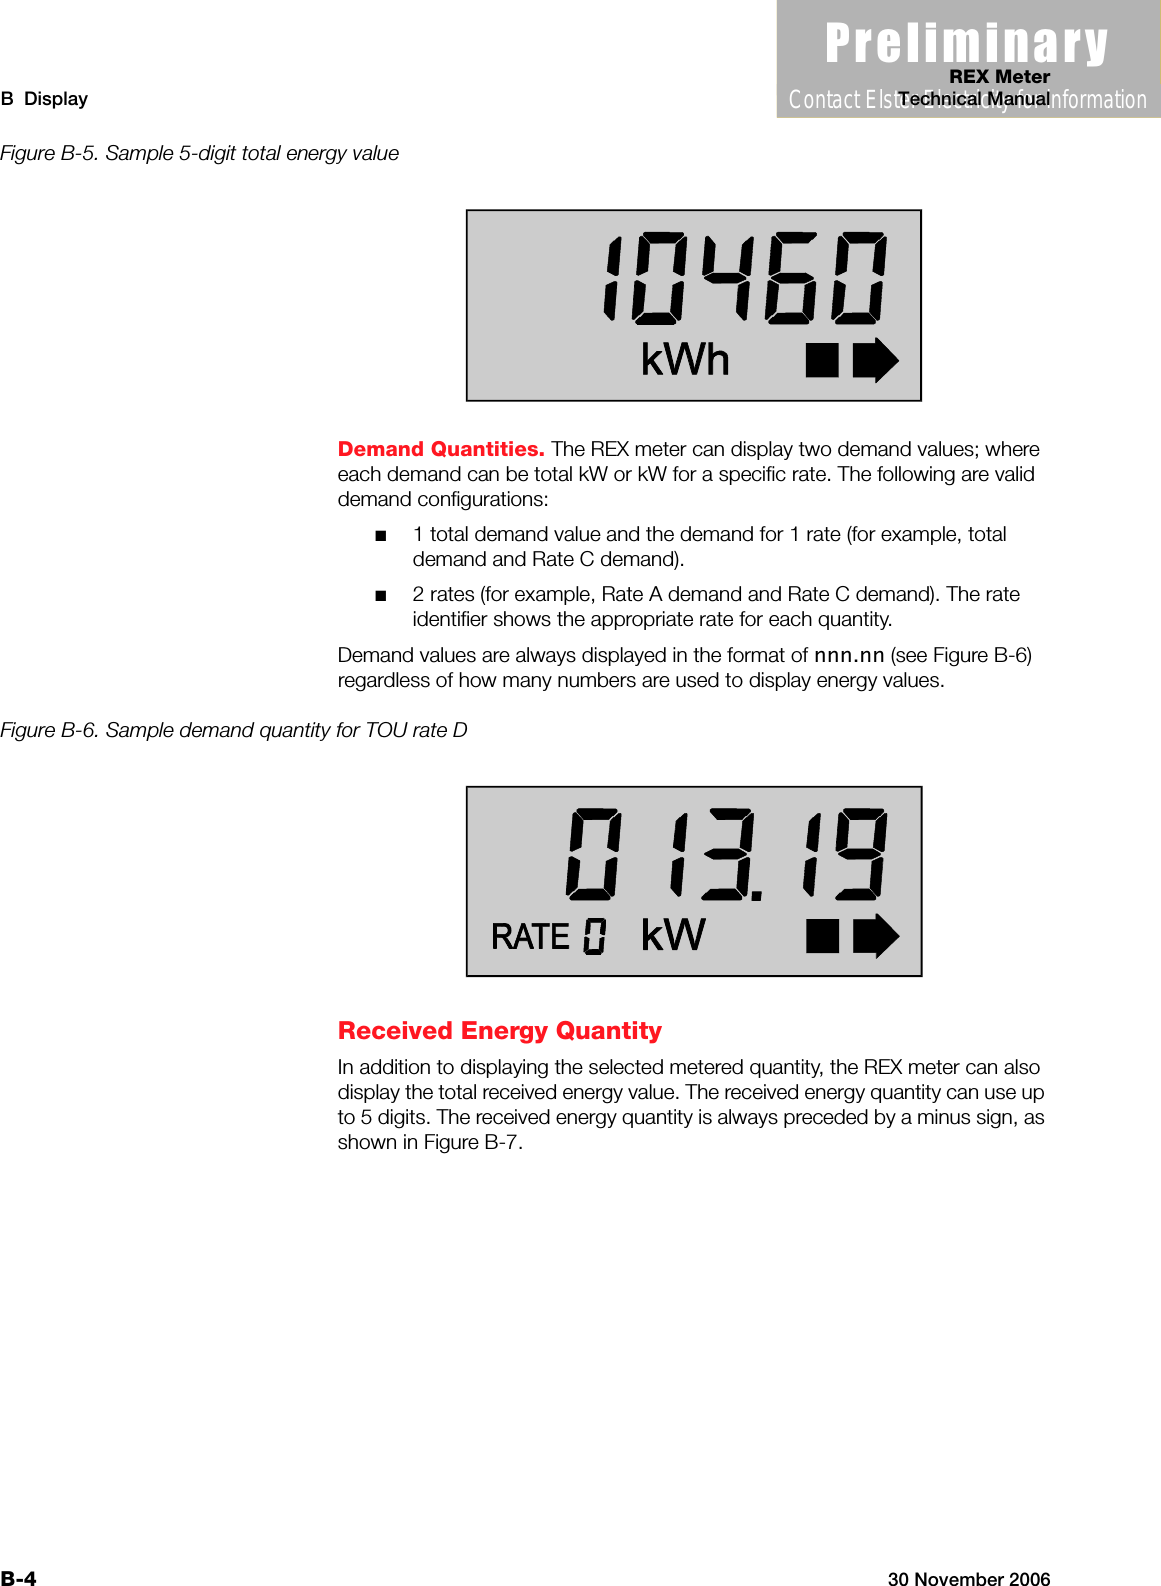 3UHOLPLQDU\Contact Elster Electricity for informationREX MeterB  Display Technical ManualB-4 30 November 2006Figure B-5. Sample 5-digit total energy valueDemand Quantities. The REX meter can display two demand values; where each demand can be total kW or kW for a specific rate. The following are valid demand configurations:■1 total demand value and the demand for 1 rate (for example, total demand and Rate C demand).■2 rates (for example, Rate A demand and Rate C demand). The rate identifier shows the appropriate rate for each quantity.Demand values are always displayed in the format of nnn.nn (see Figure B-6) regardless of how many numbers are used to display energy values.Figure B-6. Sample demand quantity for TOU rate DReceived Energy QuantityIn addition to displaying the selected metered quantity, the REX meter can also display the total received energy value. The received energy quantity can use up to 5 digits. The received energy quantity is always preceded by a minus sign, as shown in Figure B-7.